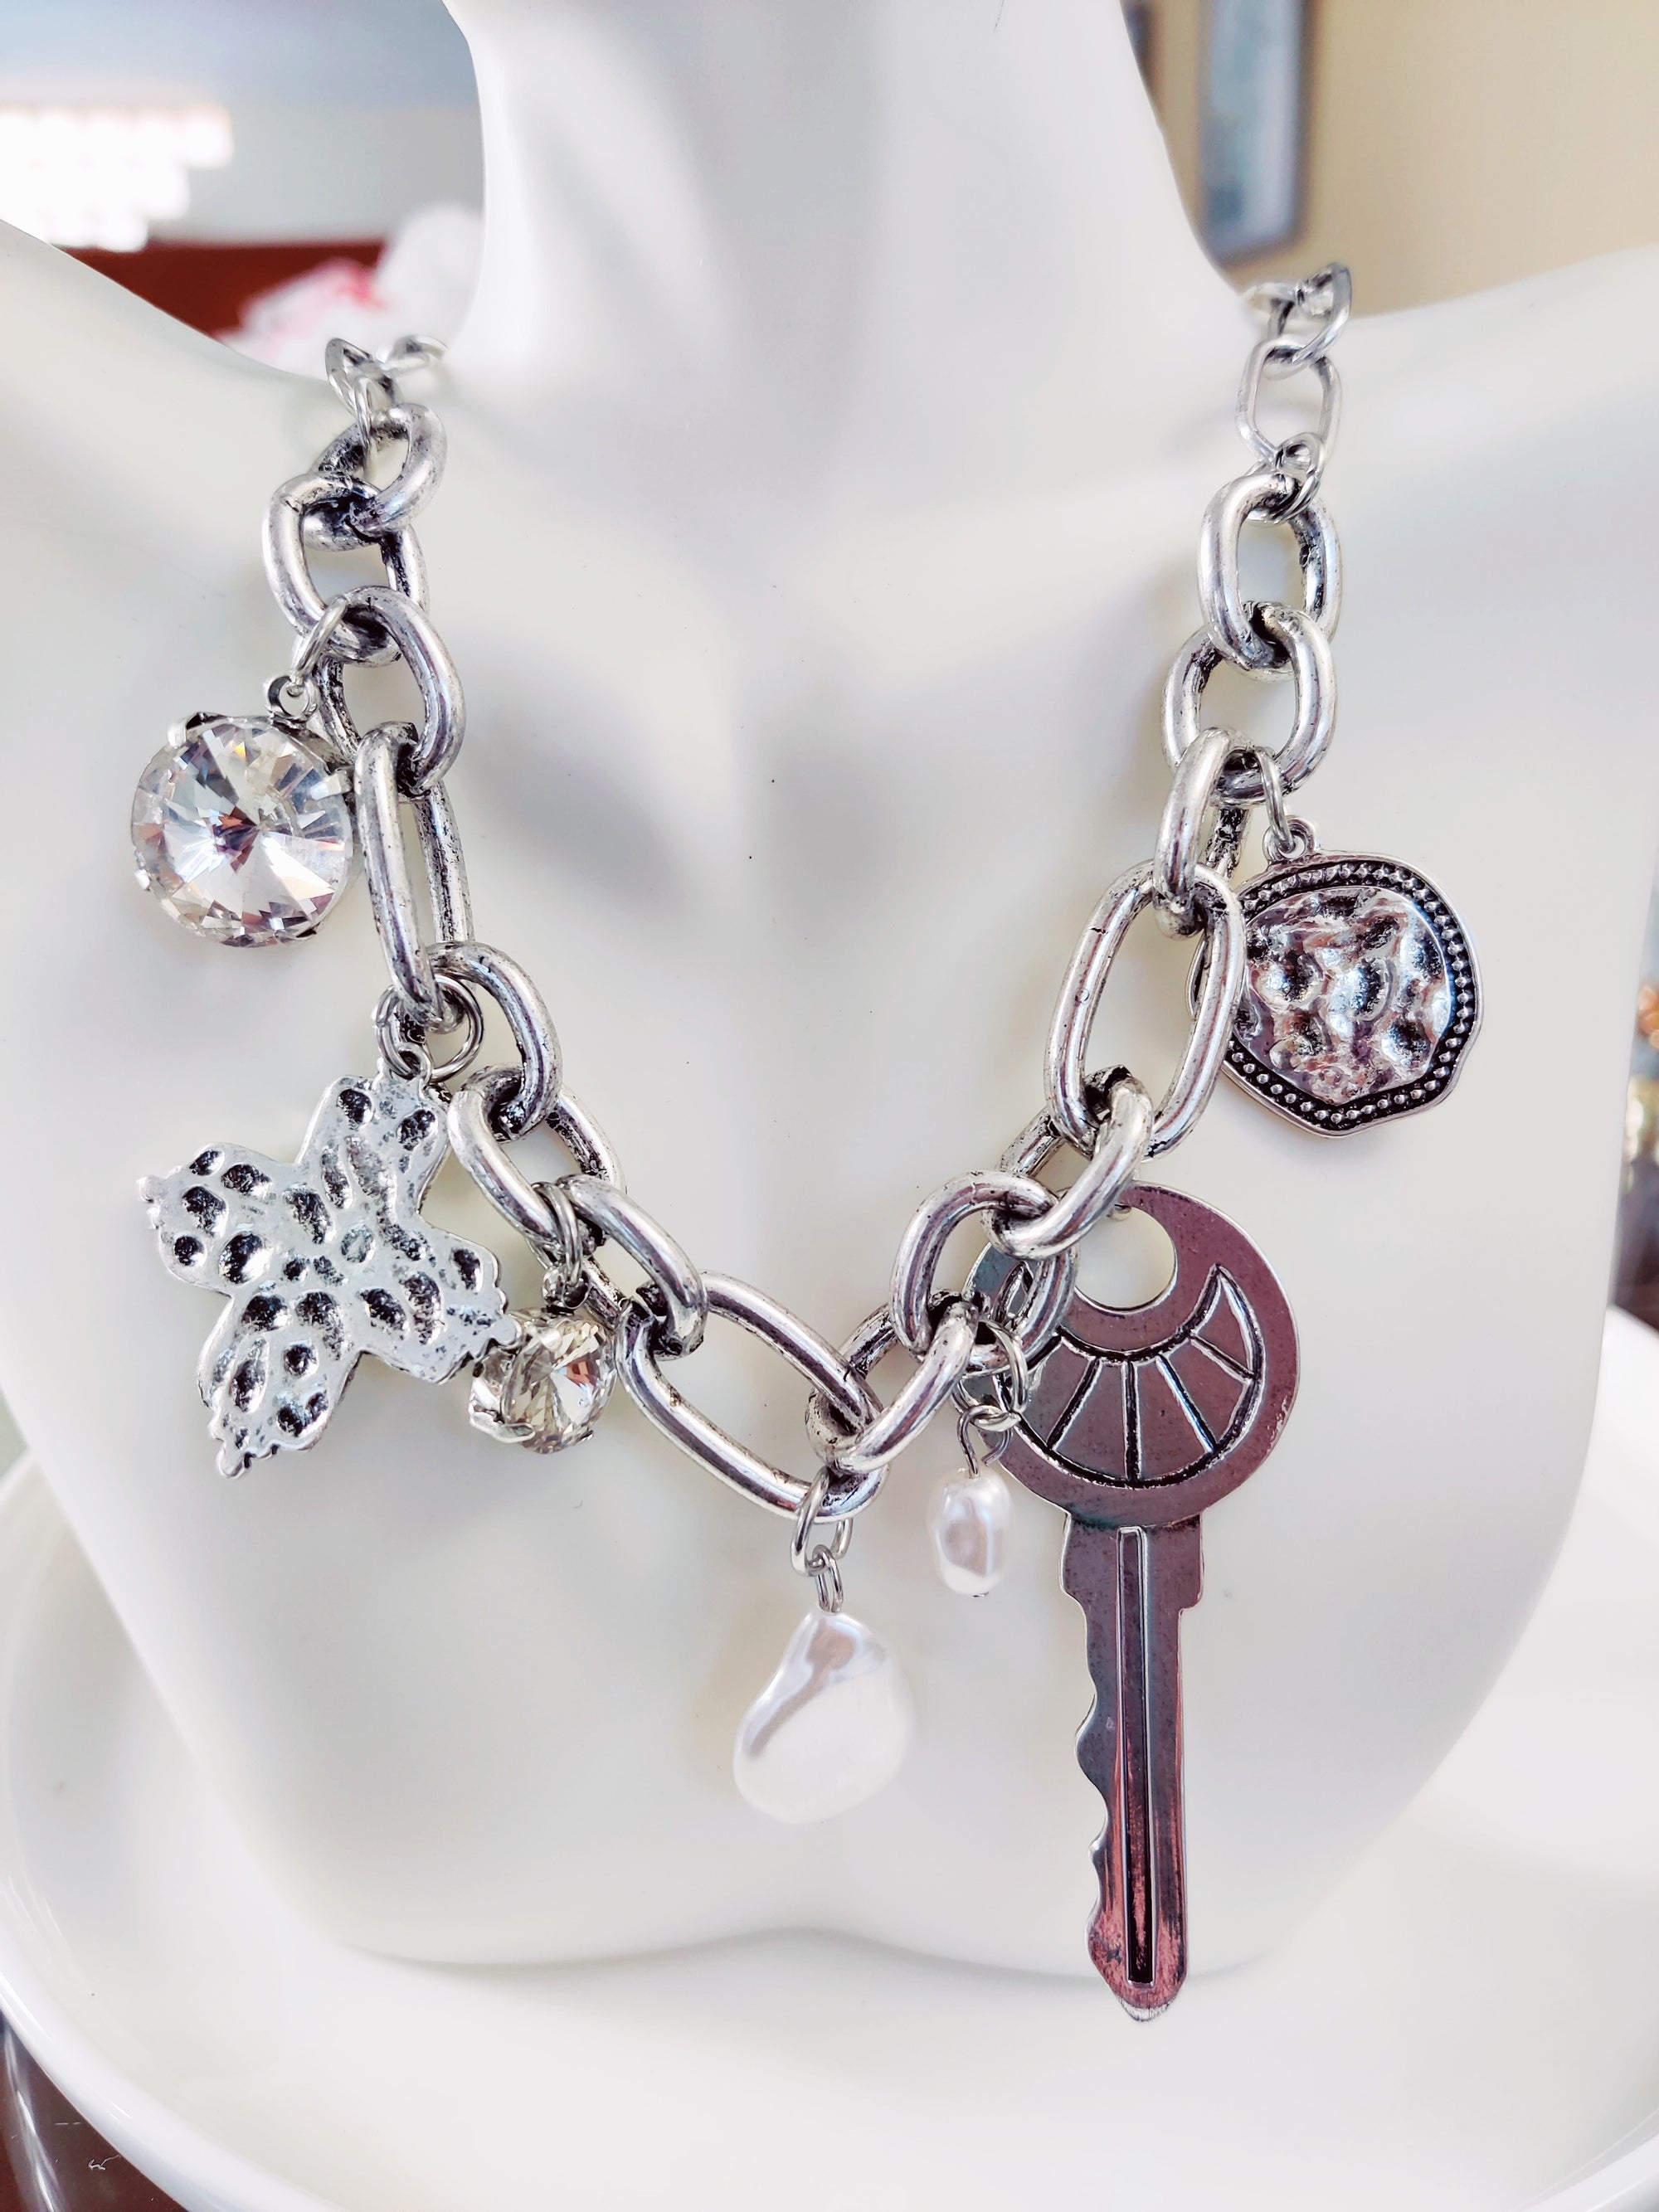 Silver plated key chain necklace